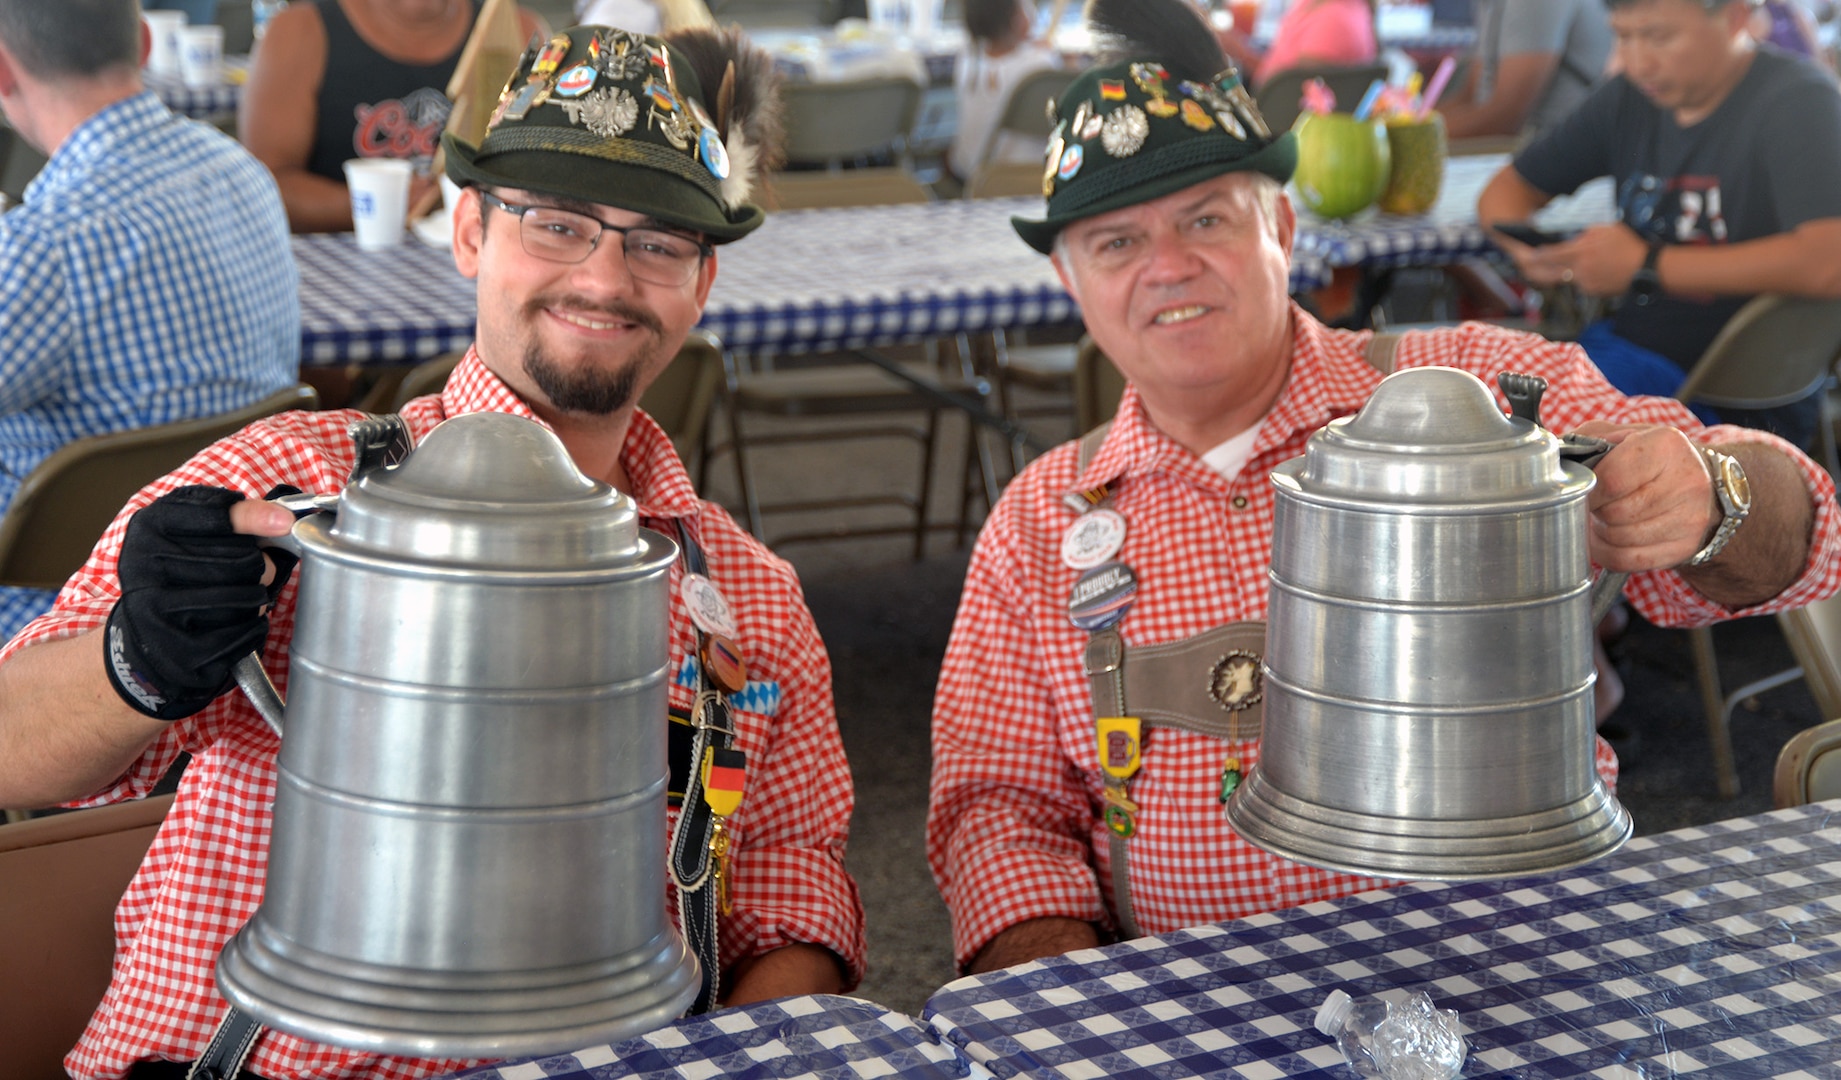 Staying hydrated is important during the sometimes hot Texas autumn afternoons. These gentlemen take that message to heart at the 2019 Joint Base San Antonio-Fort Sam Houston Oktoberfest celebration Oct. 19.